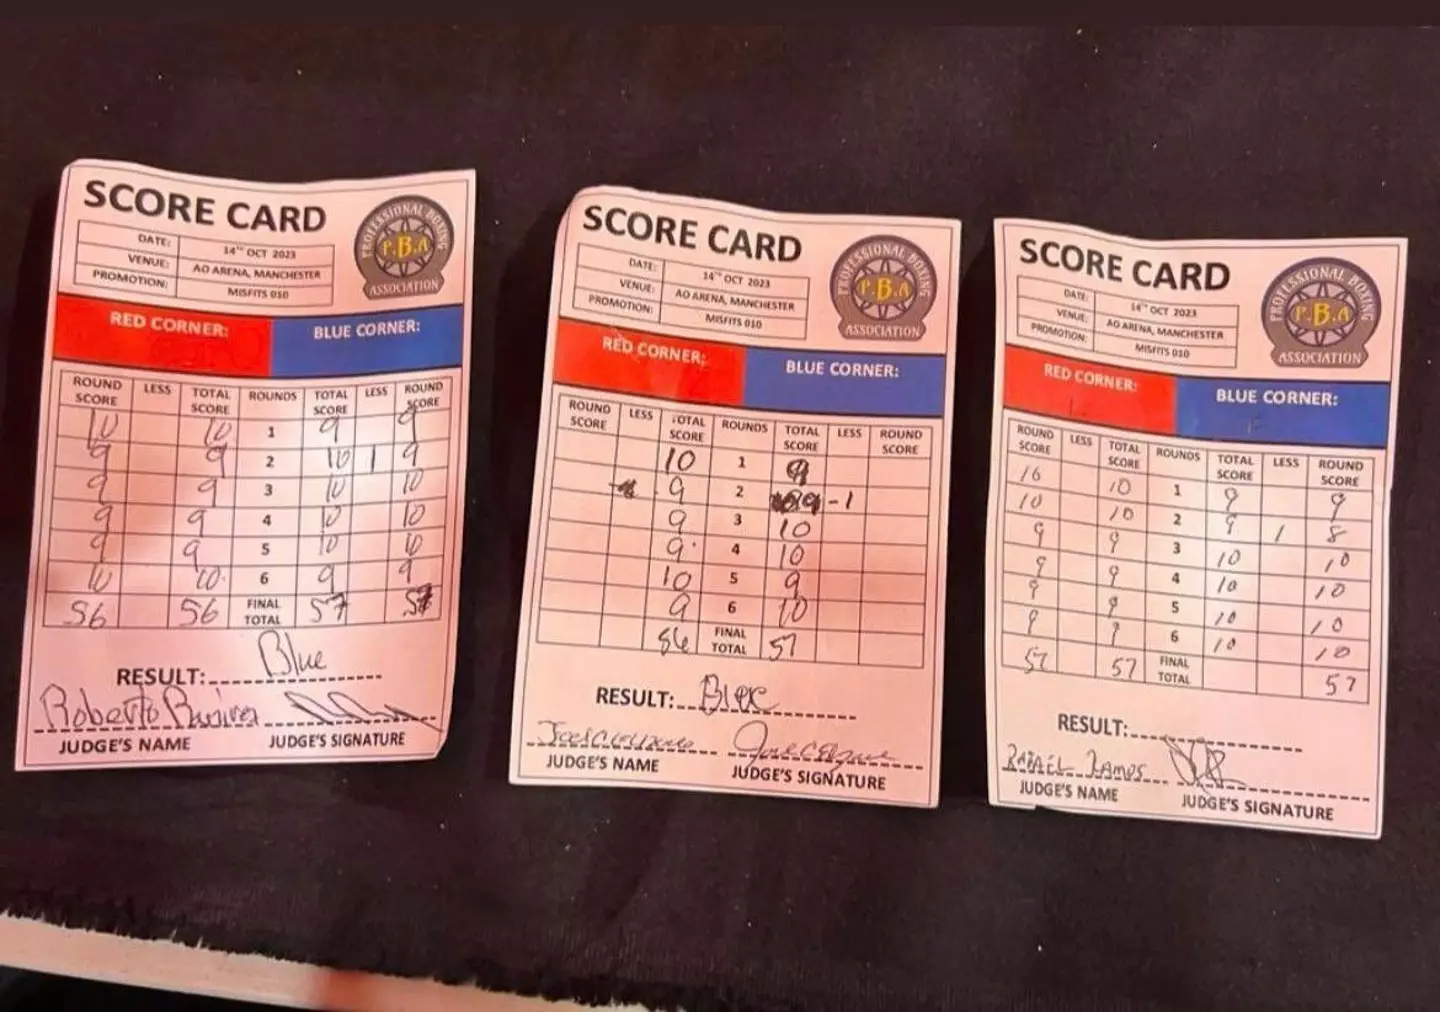 One of the judge's scorecards didn't add up.